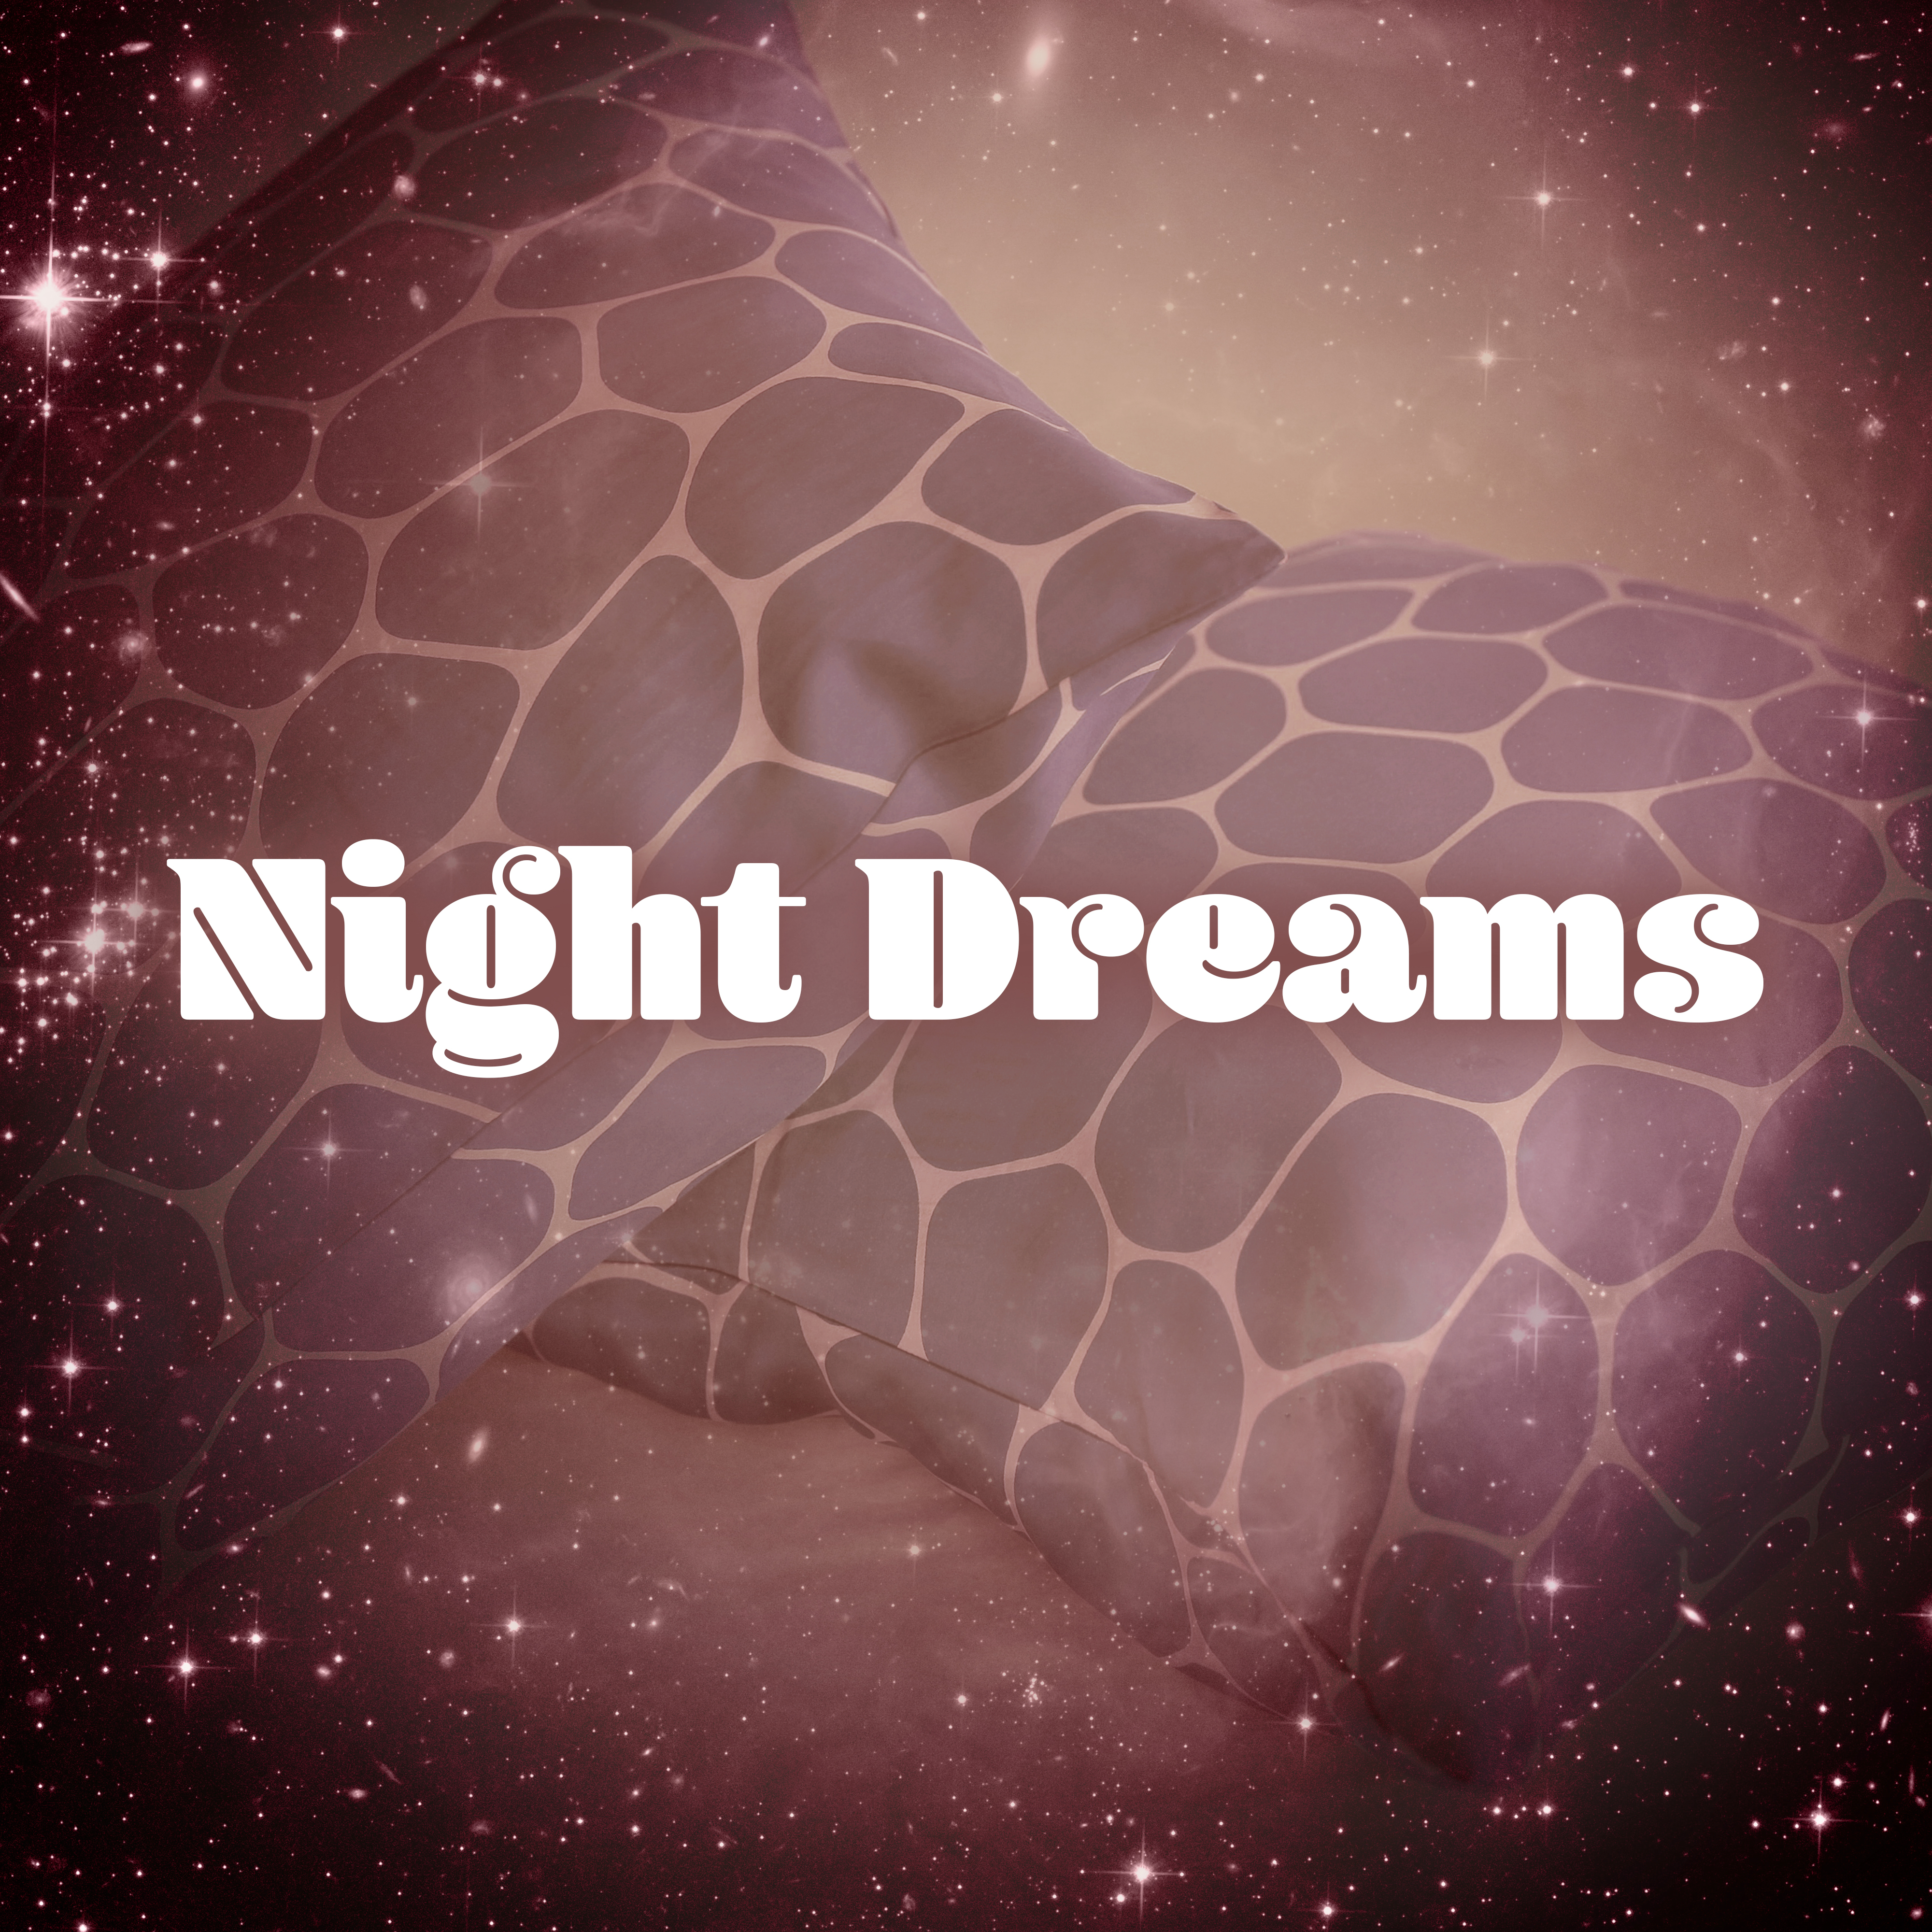 Night Dreams - Fairy Tale for Pillows, Lullaby for Dream, Sweet Dreams Baby Roo